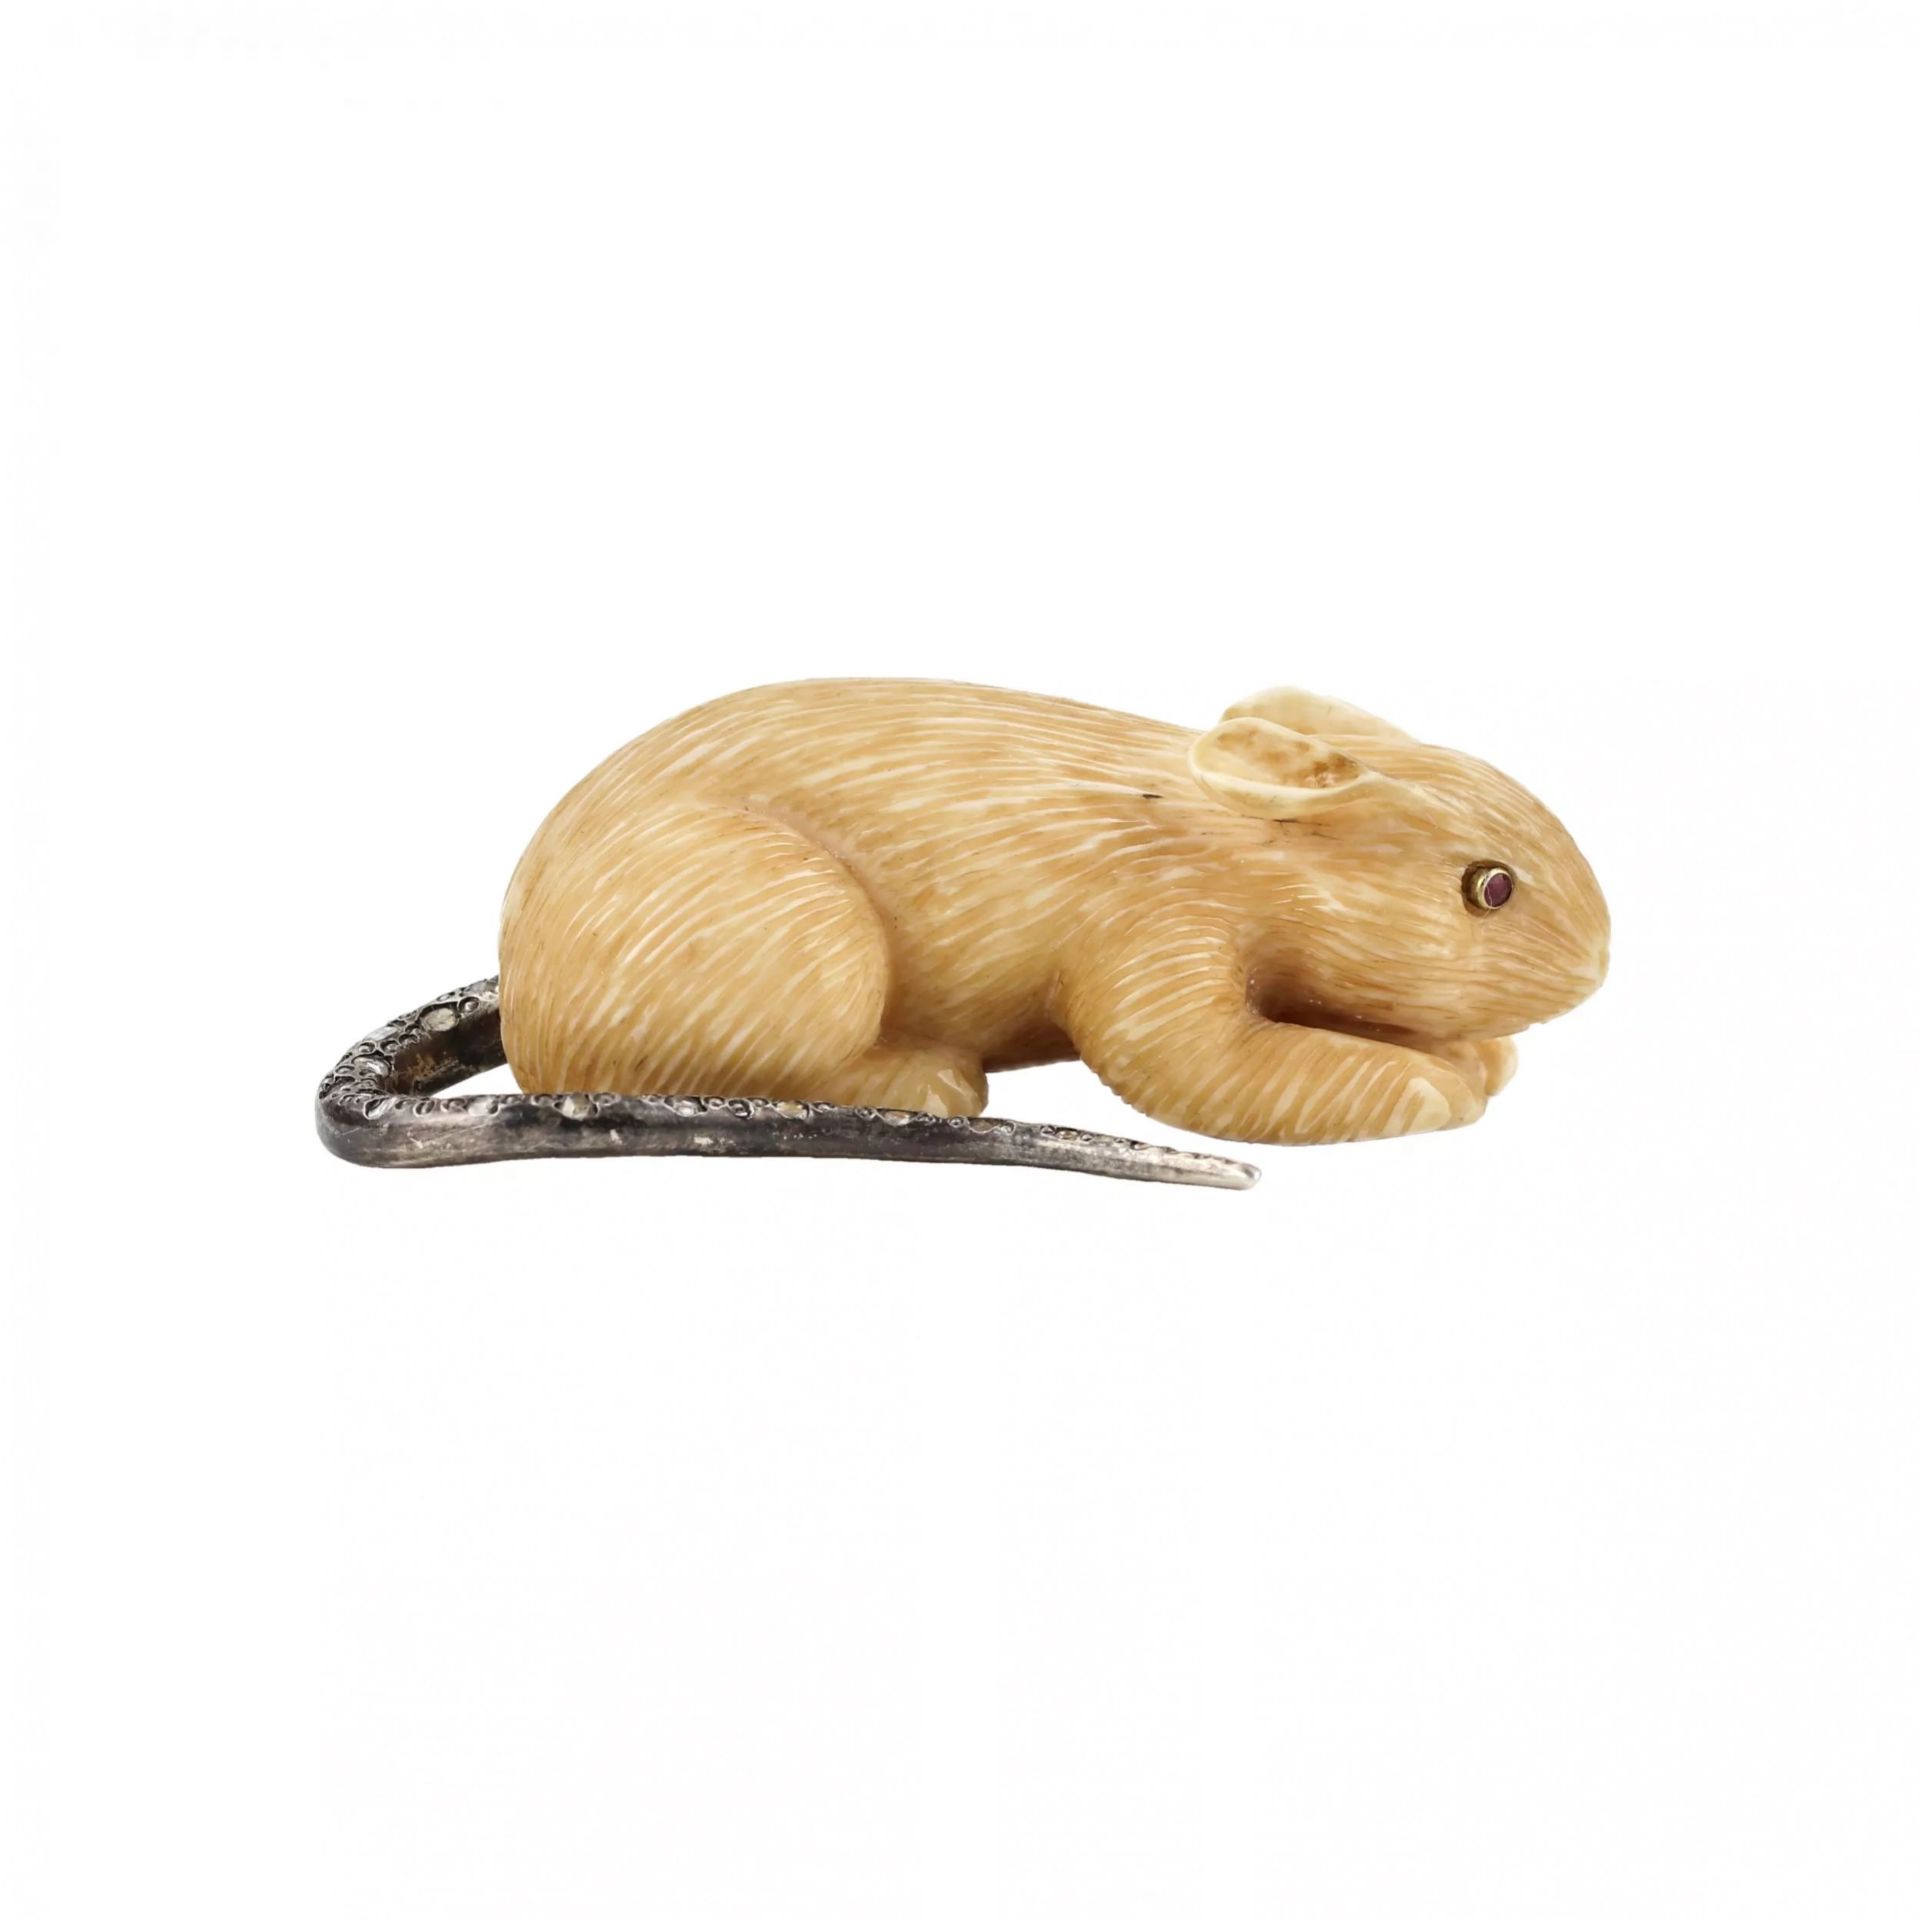 Carved mammoth tusk mouse with diamond tail. - Image 9 of 9